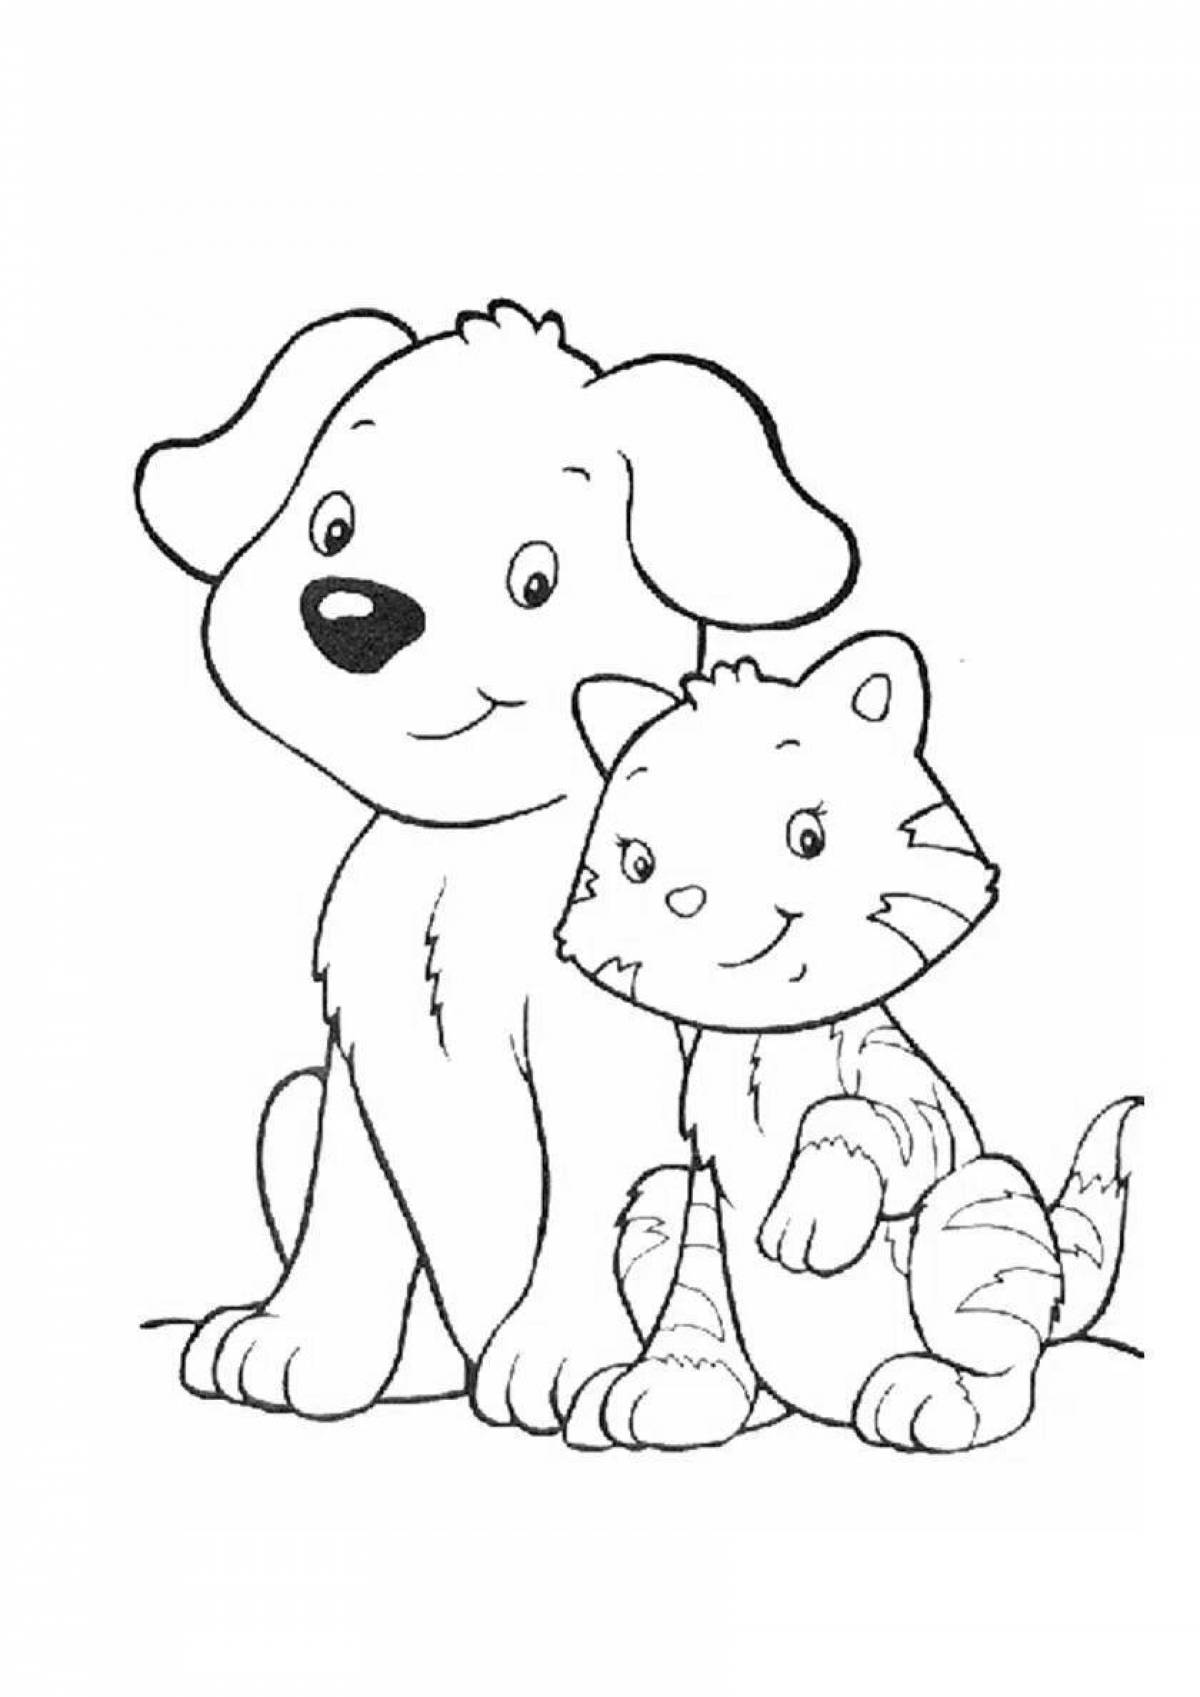 Dogs and cats for children #5